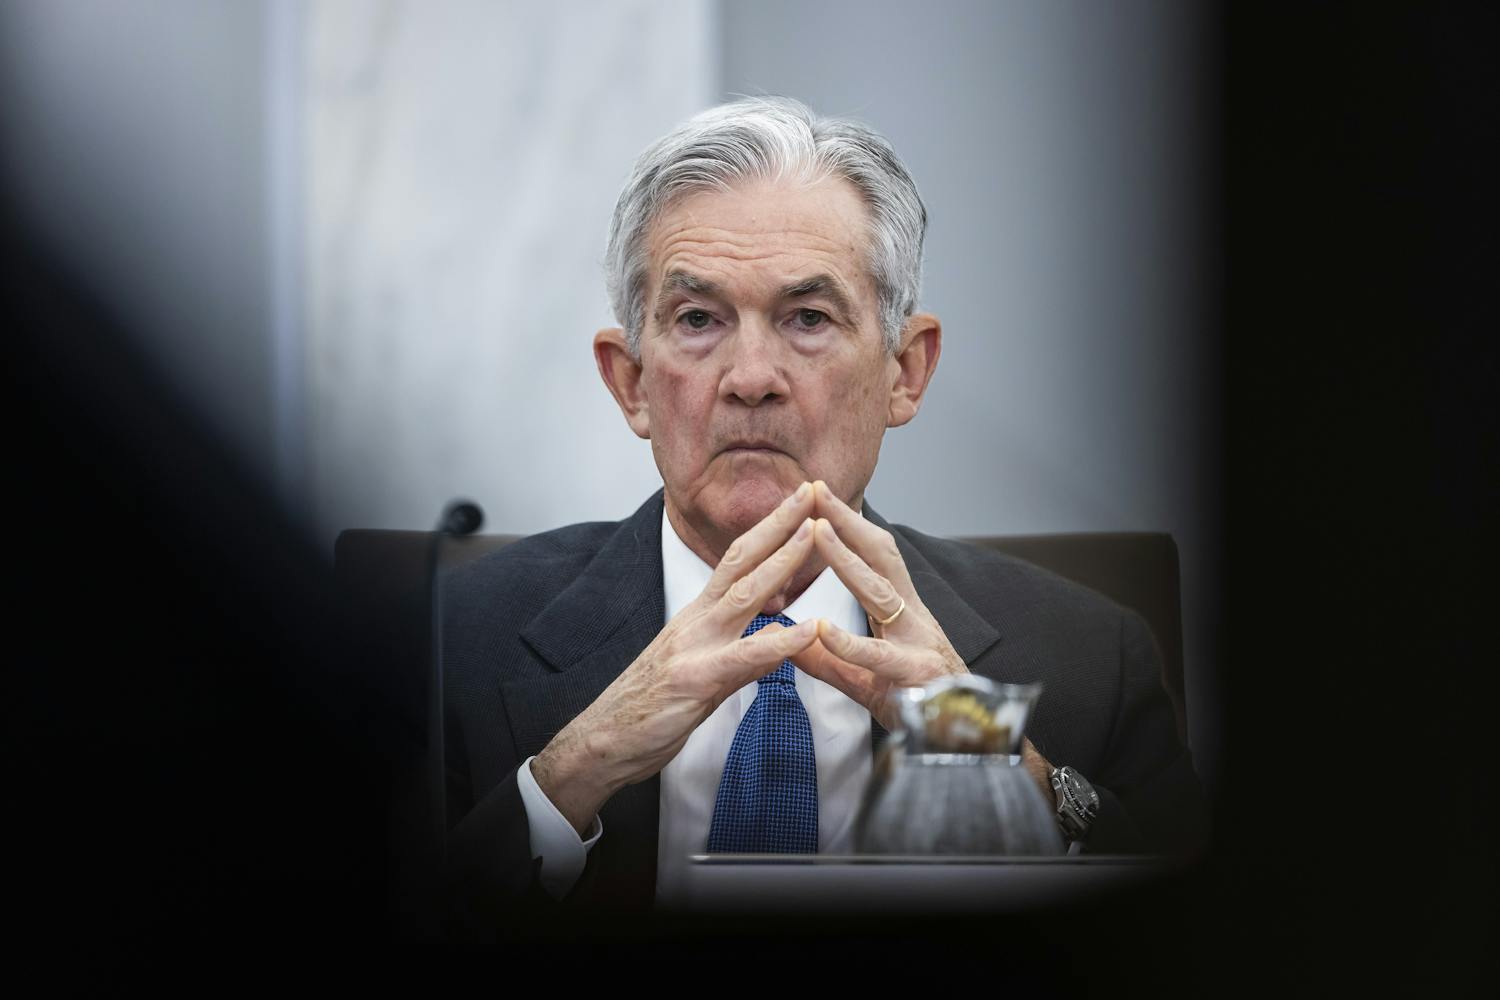 The Federal Reserve has left US interest rates unchanged again